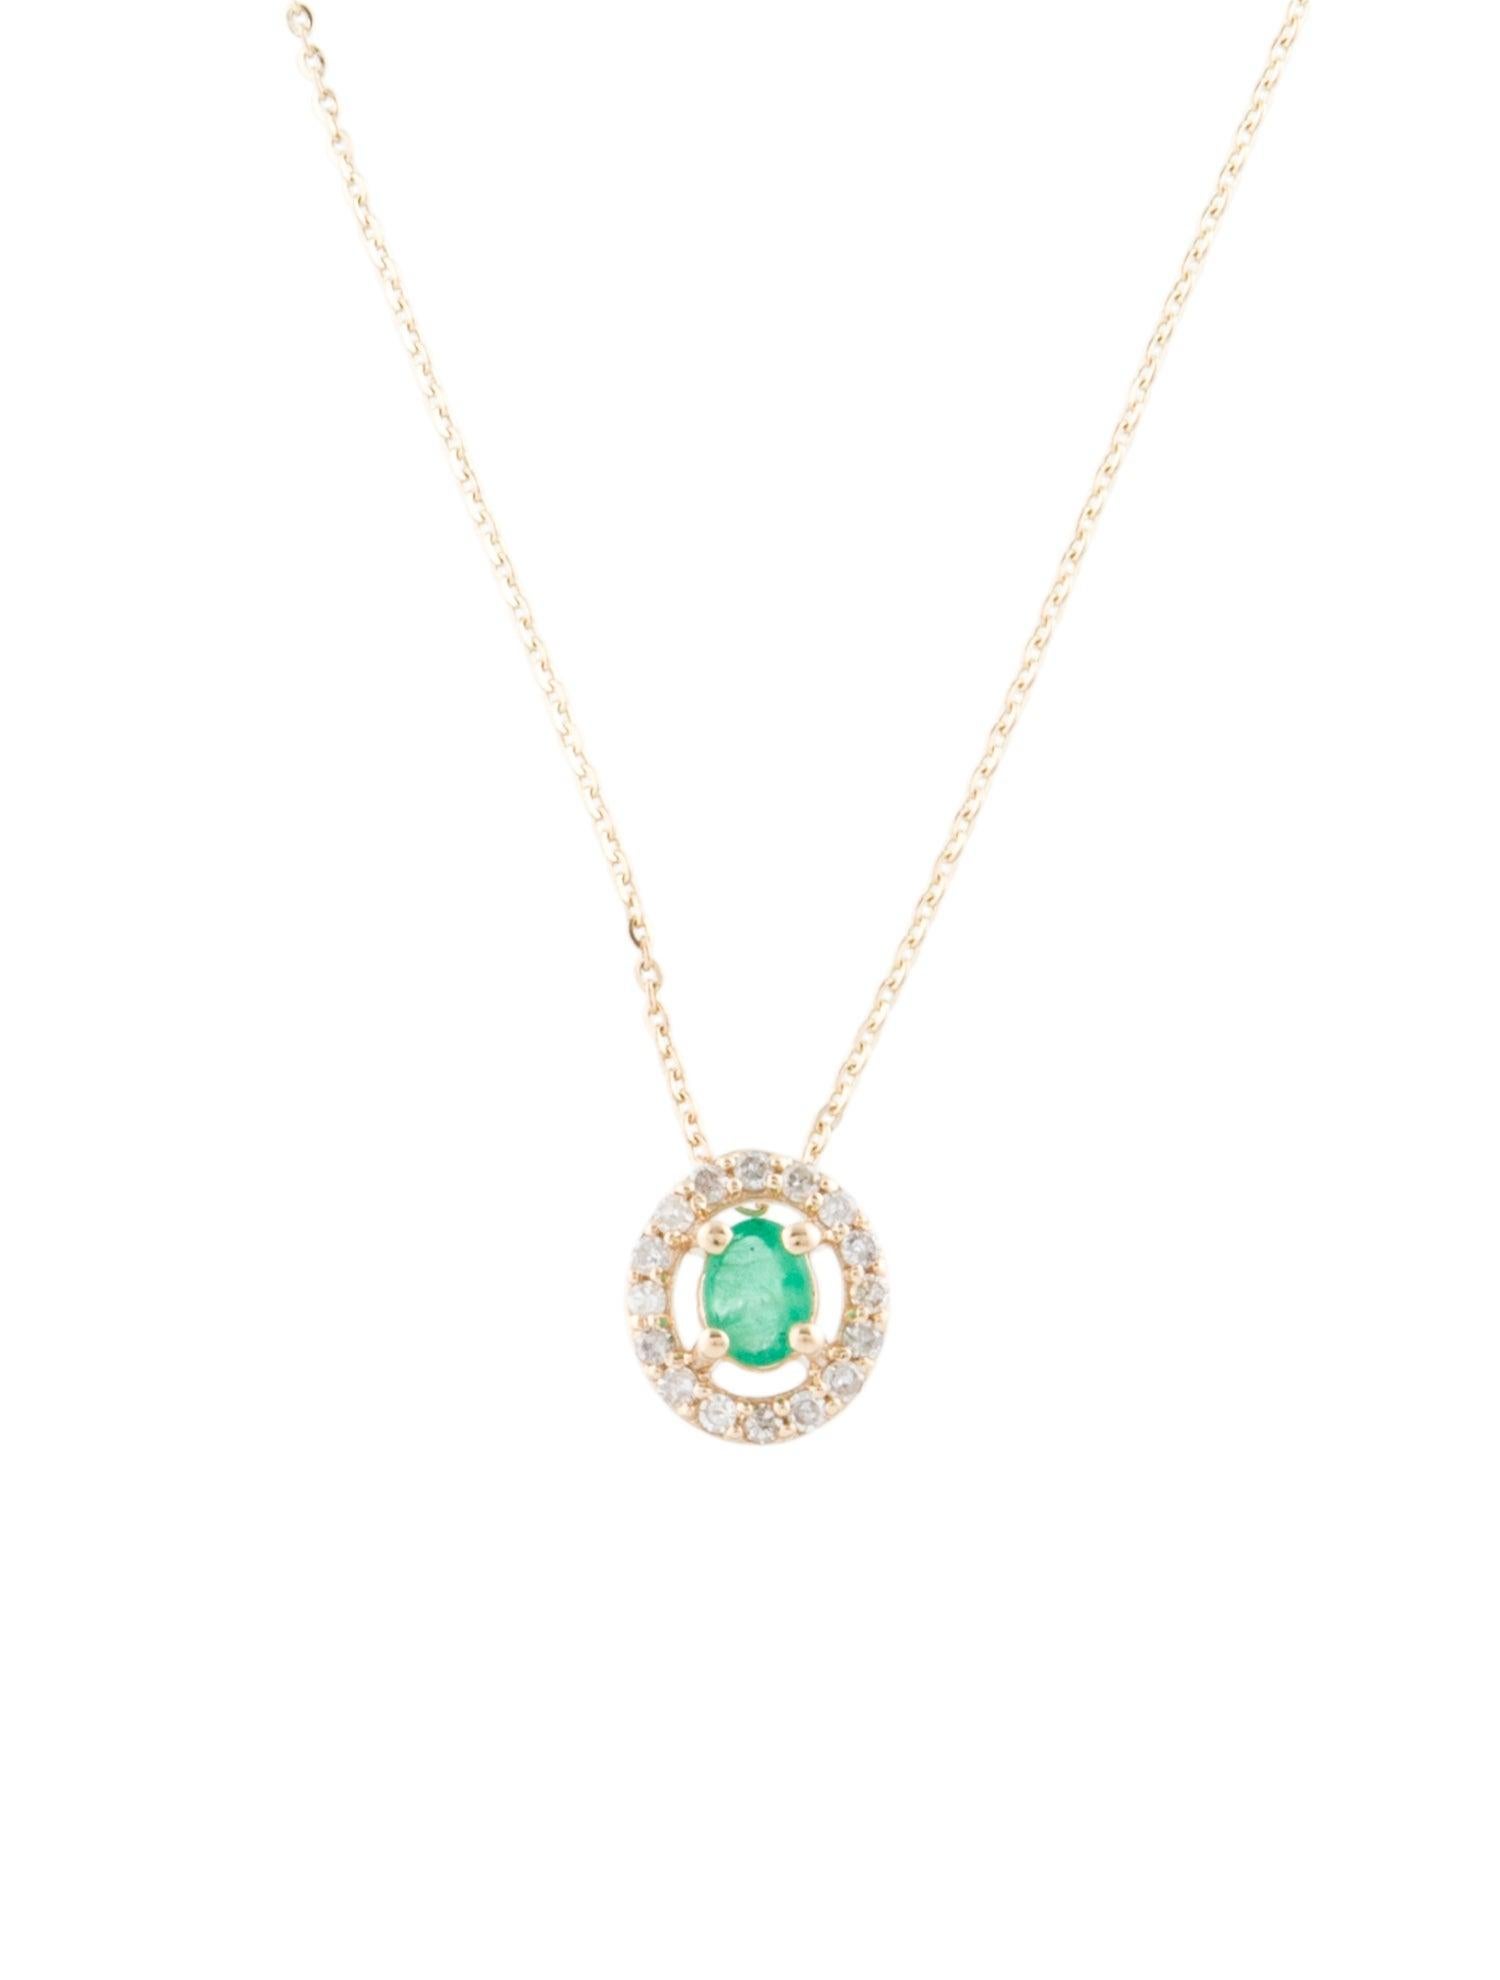 14K Emerald & Diamond Pendant Necklace: Exquisite Luxury Statement Jewelry Piece In New Condition For Sale In Holtsville, NY